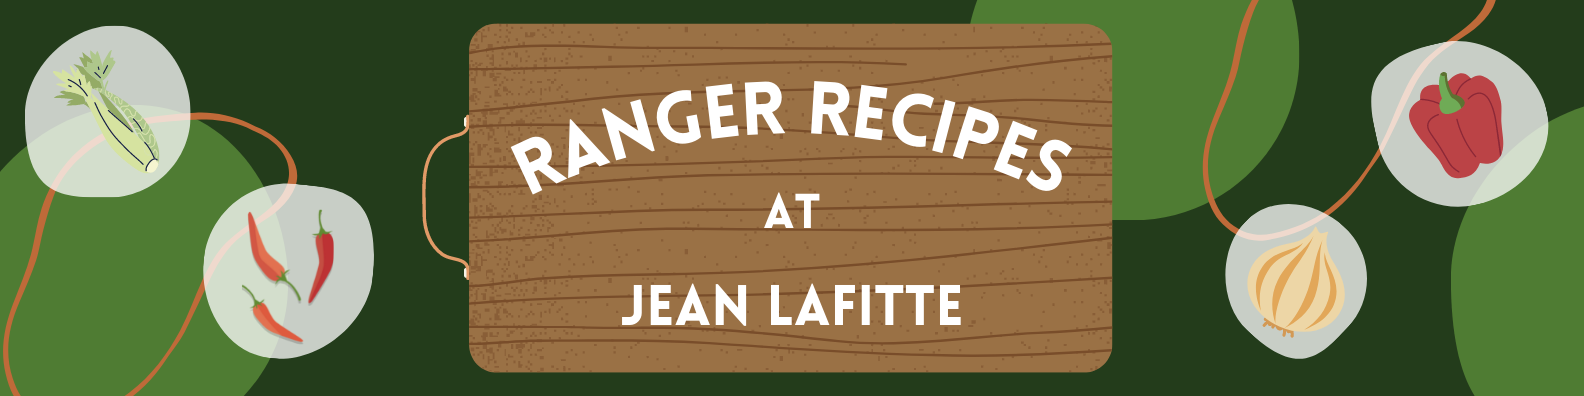 Graphic of a cutting board with the text "Ranger Recipes at Jean Lafitte"